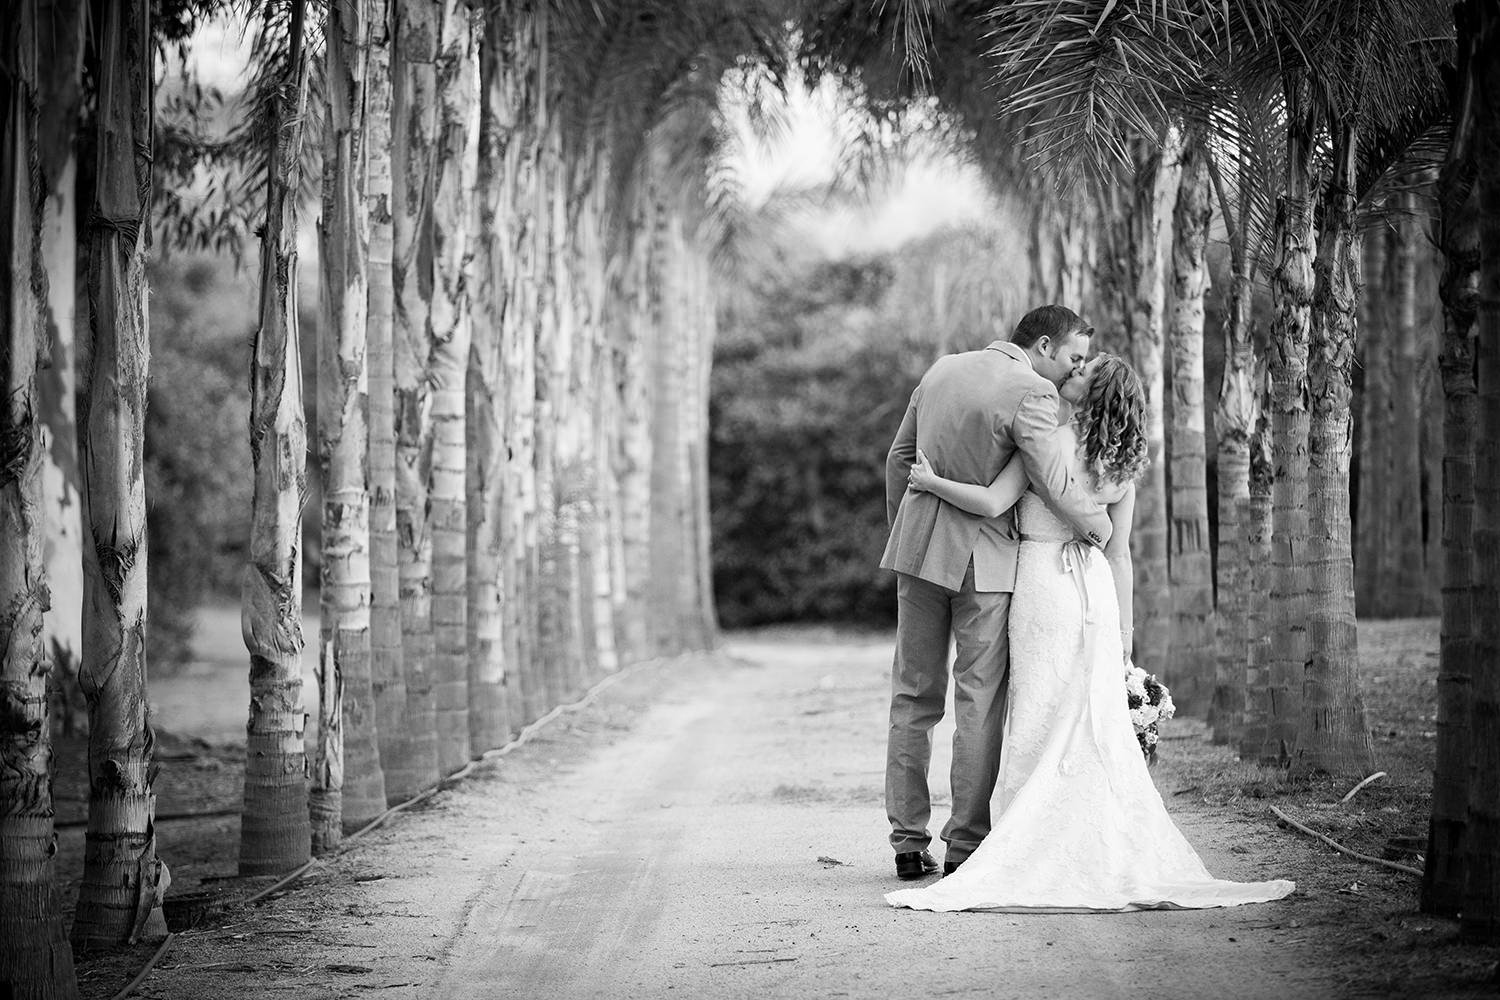 black and white romantic shot by the palm trees